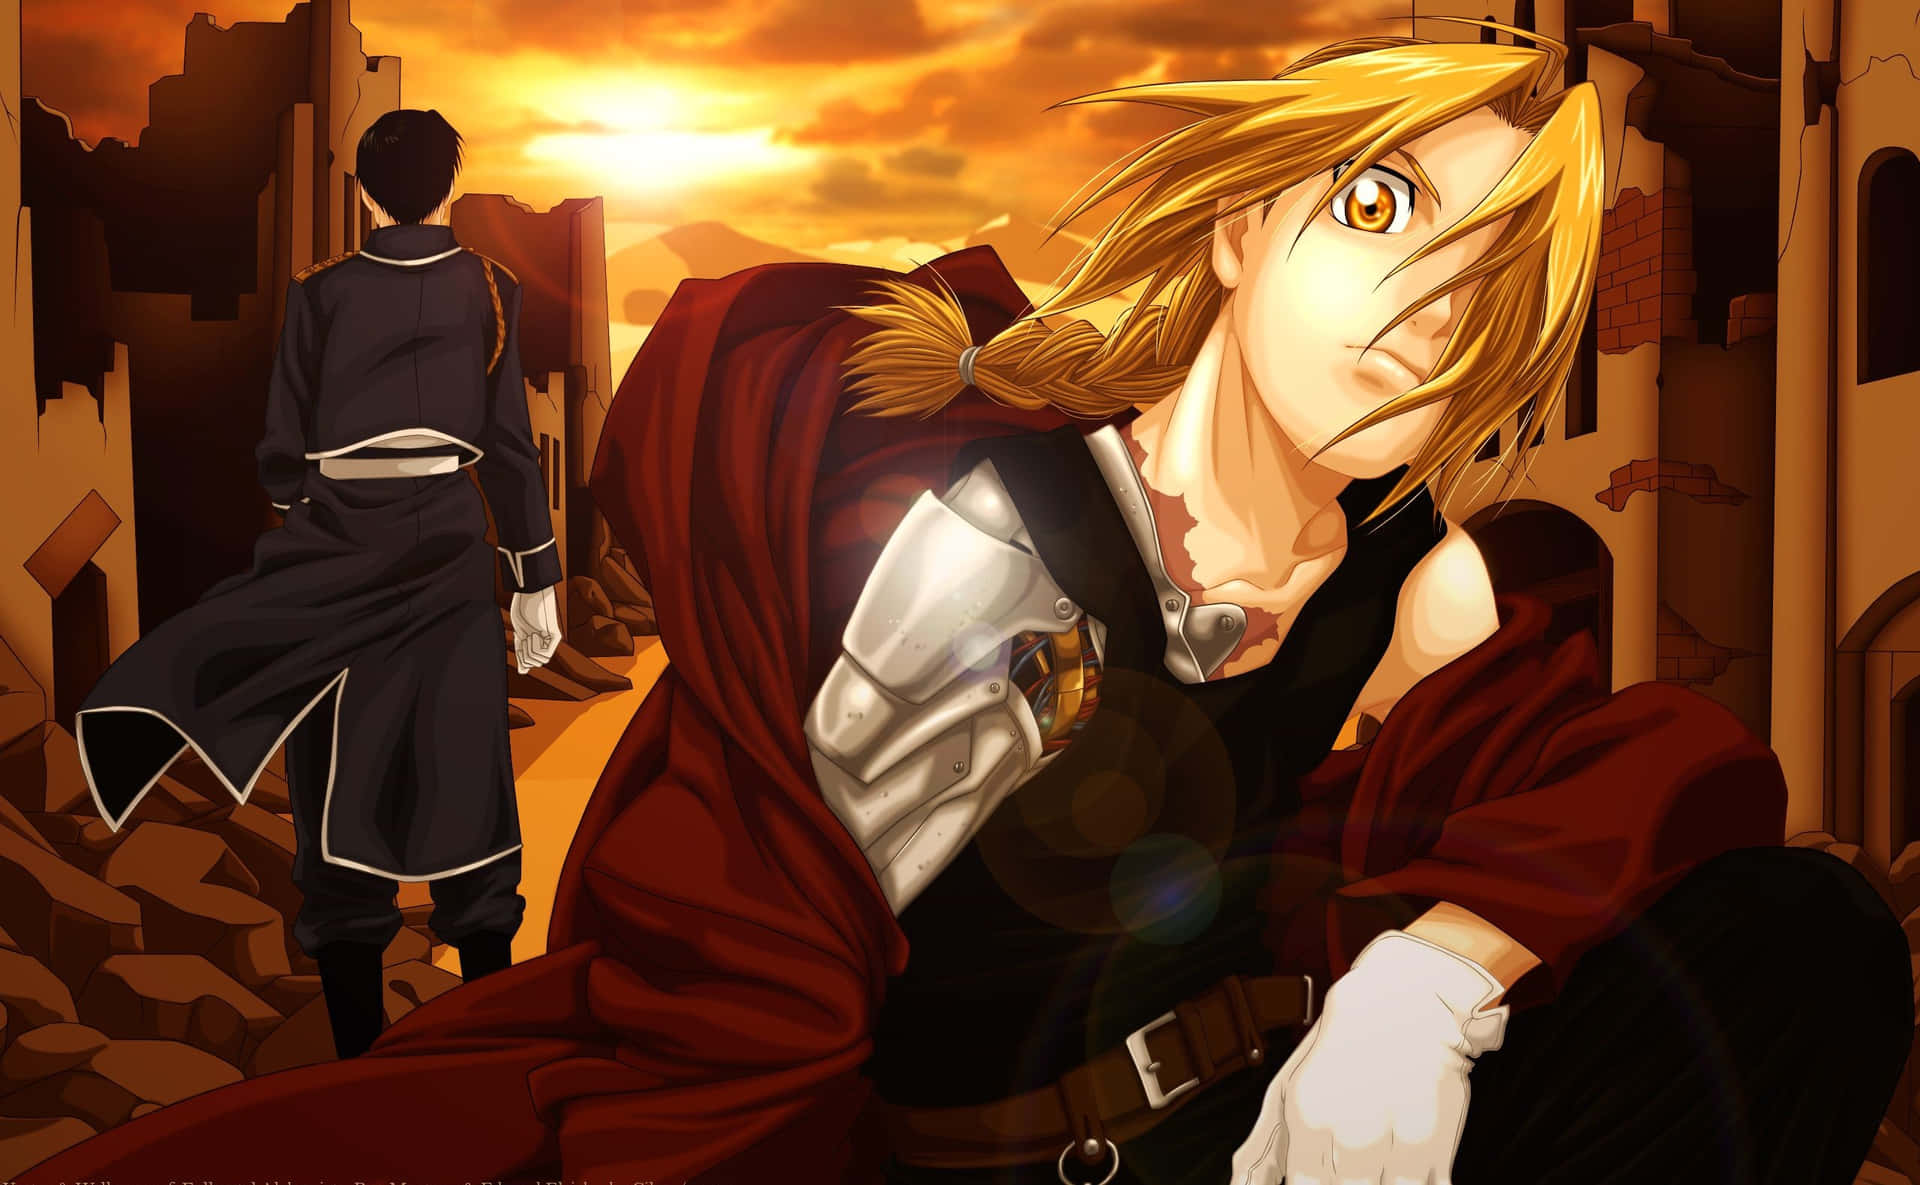 Edward Elric - A Masterful Alchemist In Action Background